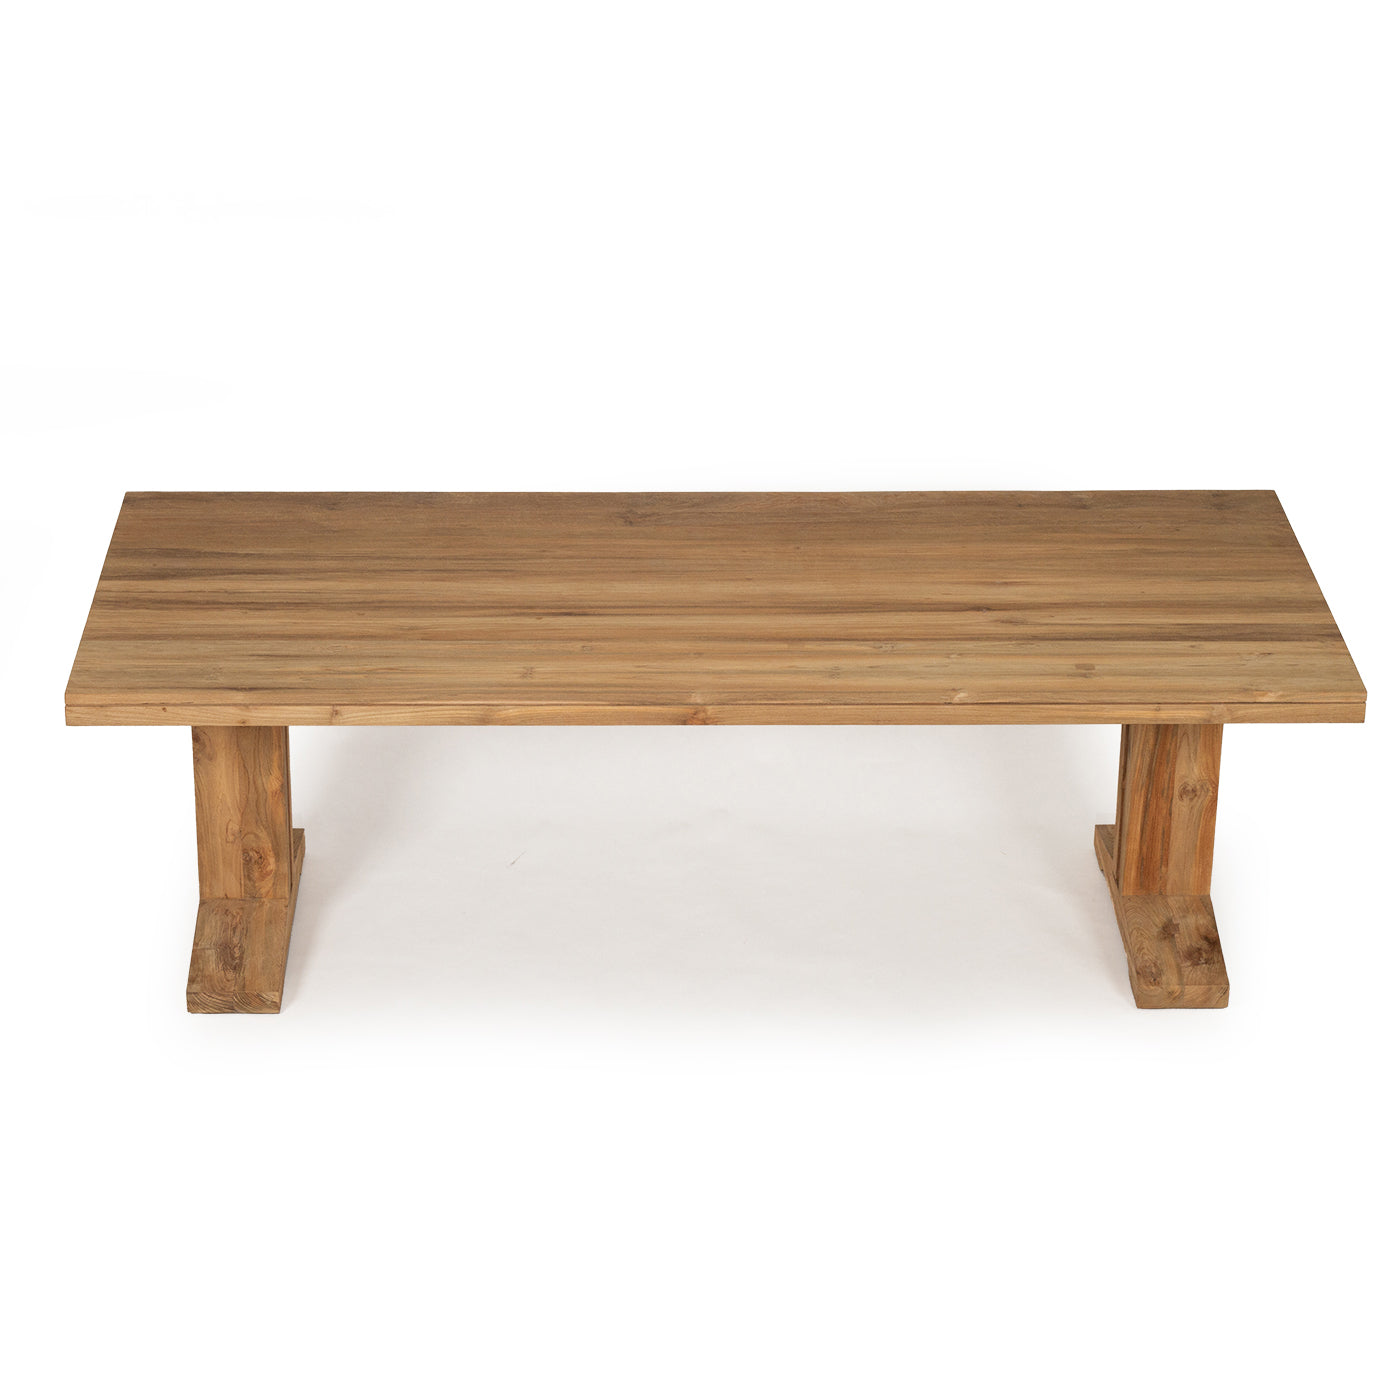 Mauria Solid Teak Dining Table – 2.4m - Notbrand